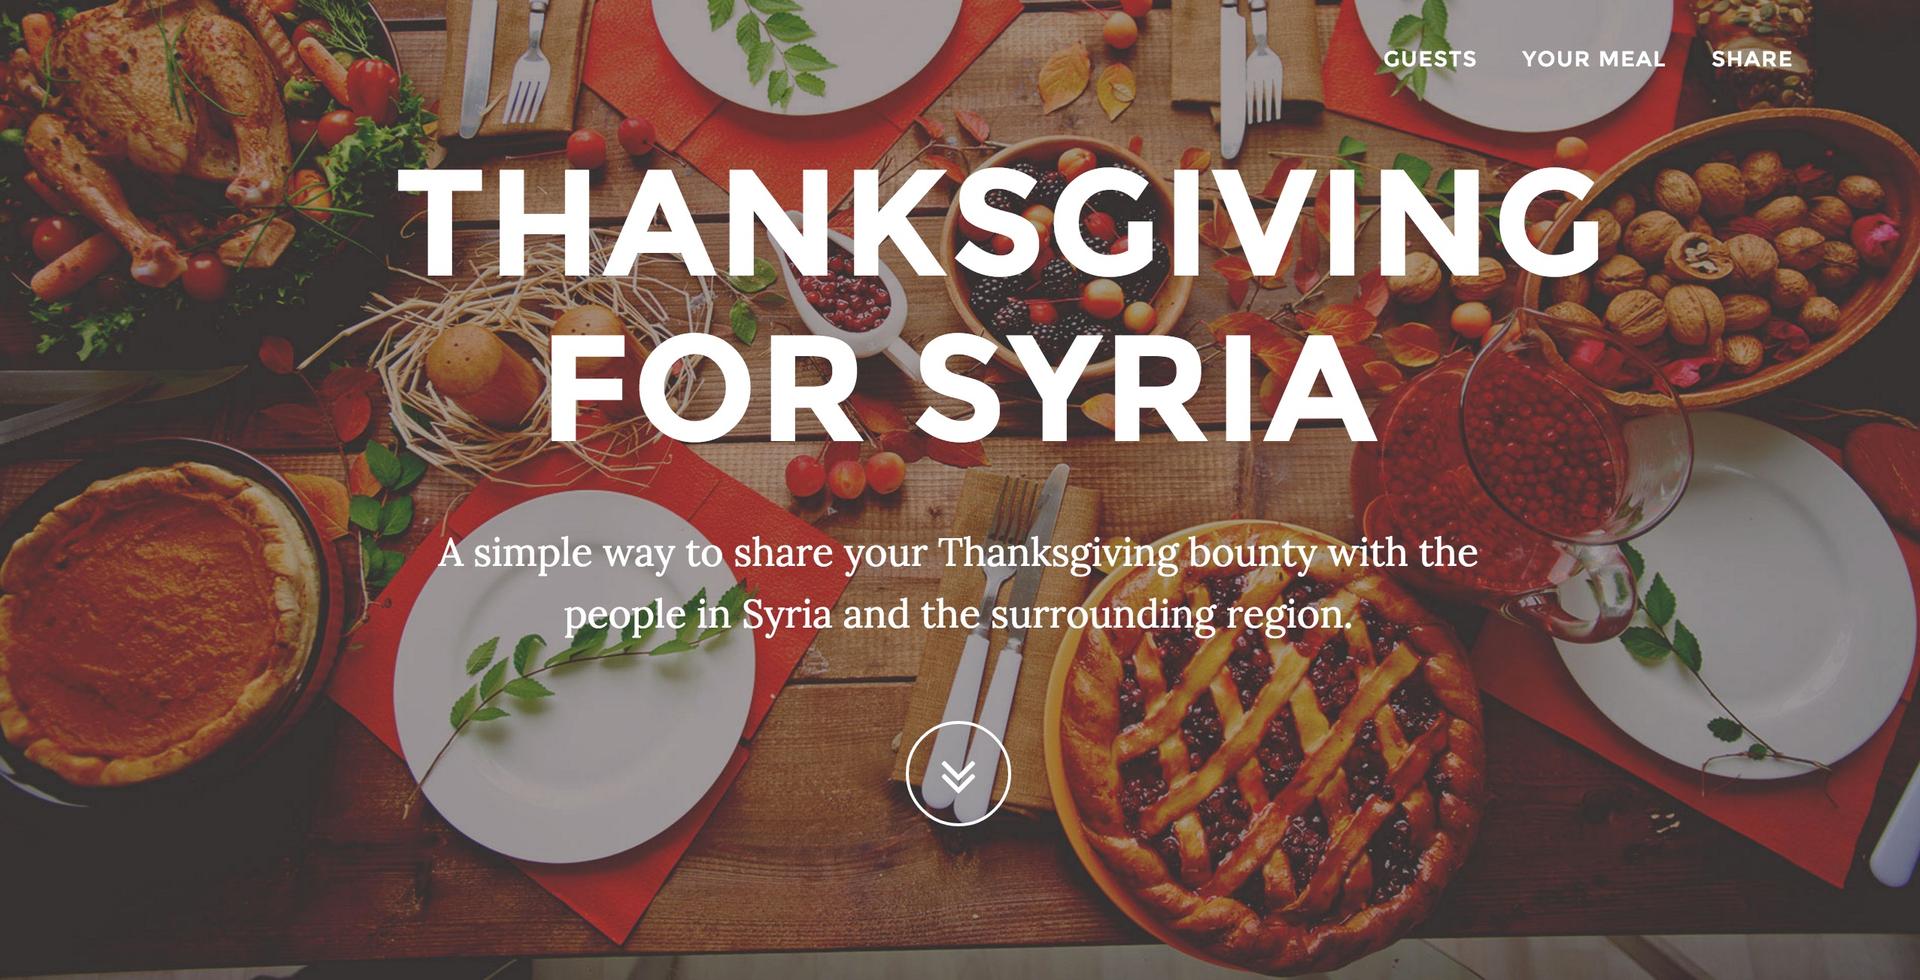 A screenshot from Thanksgiving for Syria.